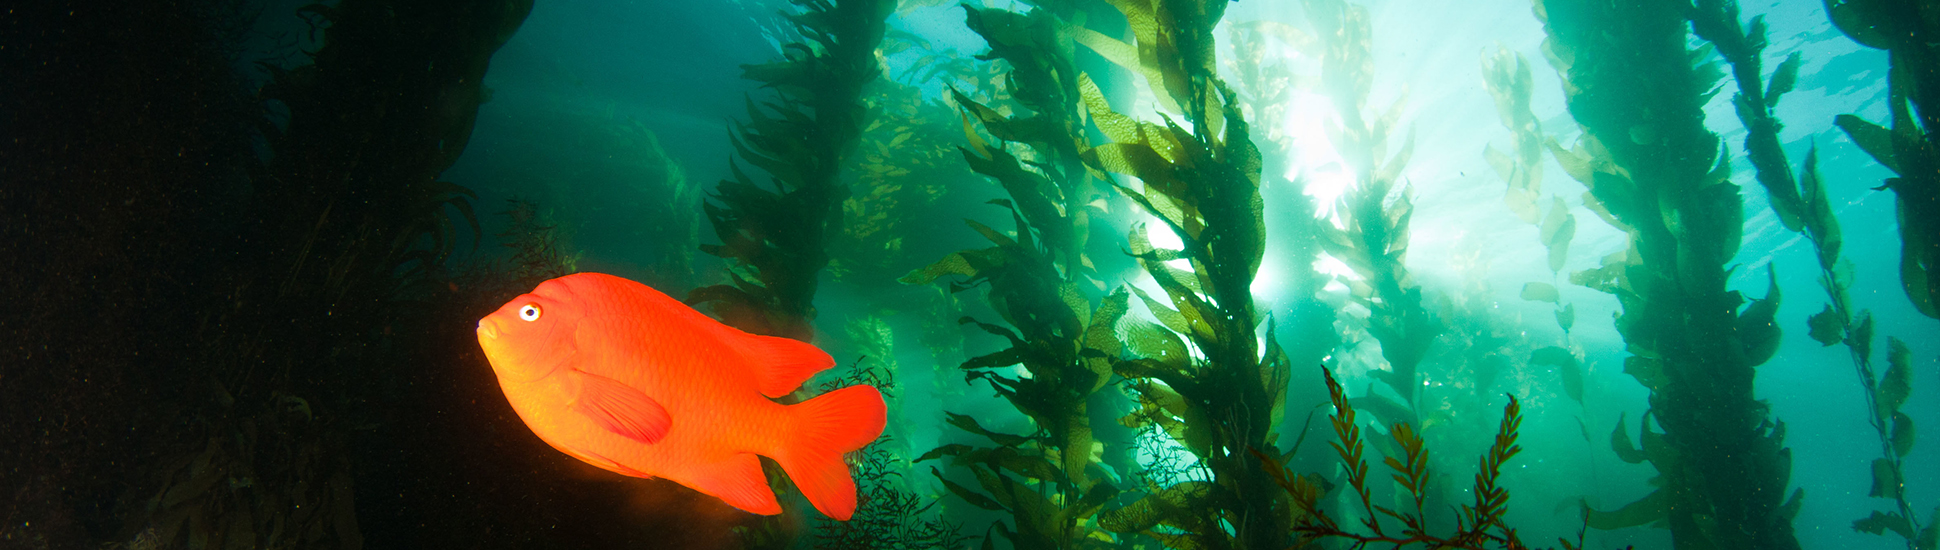 Kelp forests like this one of of Catalina Island provide shelter and food for fish and invertebrate species.